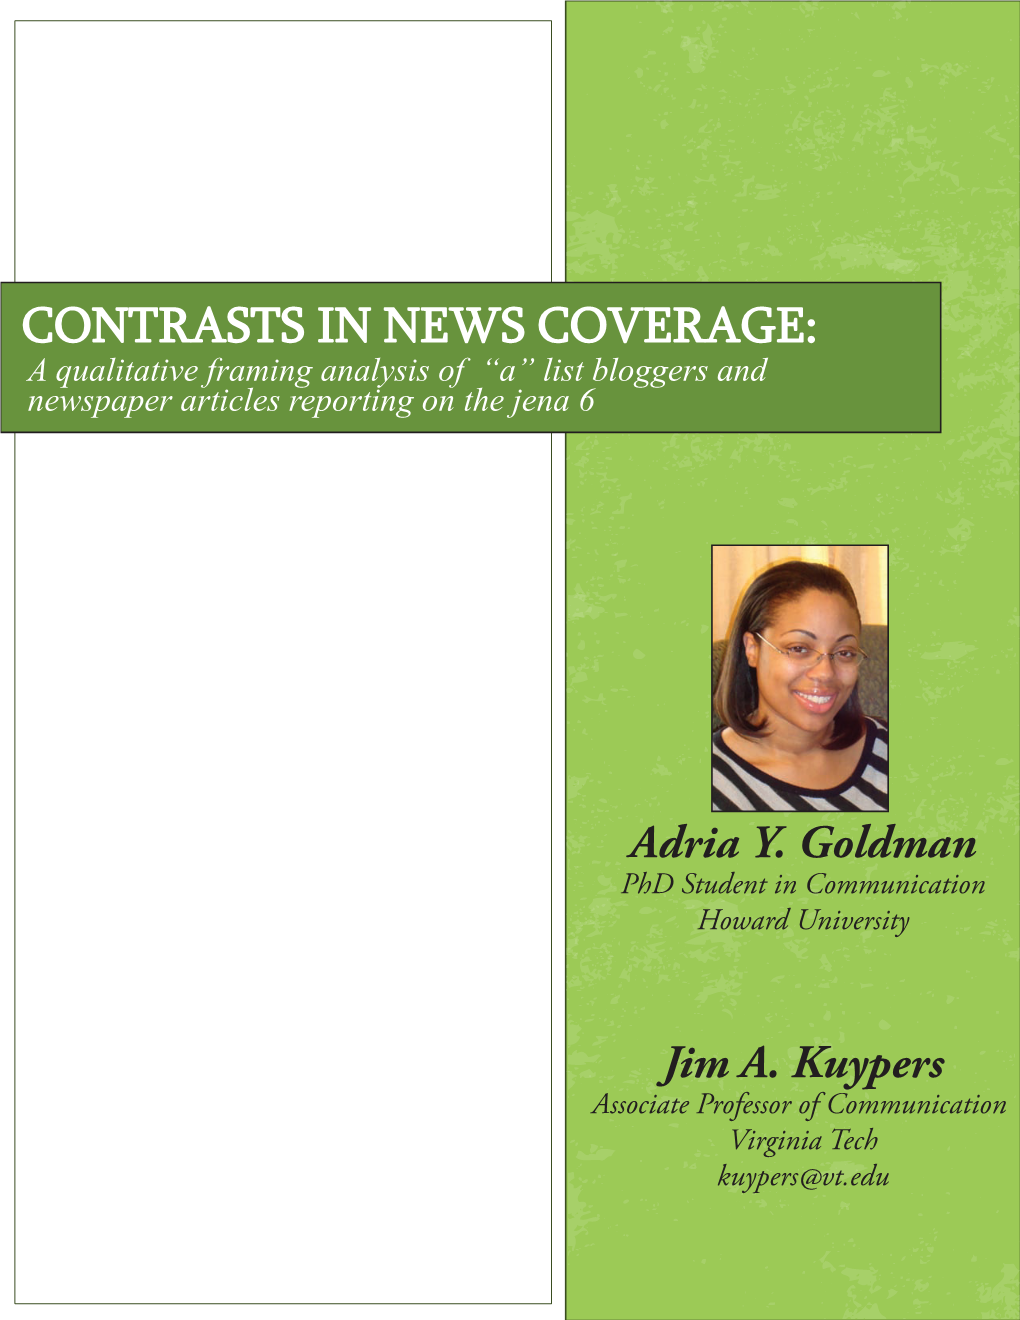 CONTRASTS in NEWS COVERAGE: a Qualitative Framing Analysis of “A” List Bloggers and Newspaper Articles Reporting on the Jena 6